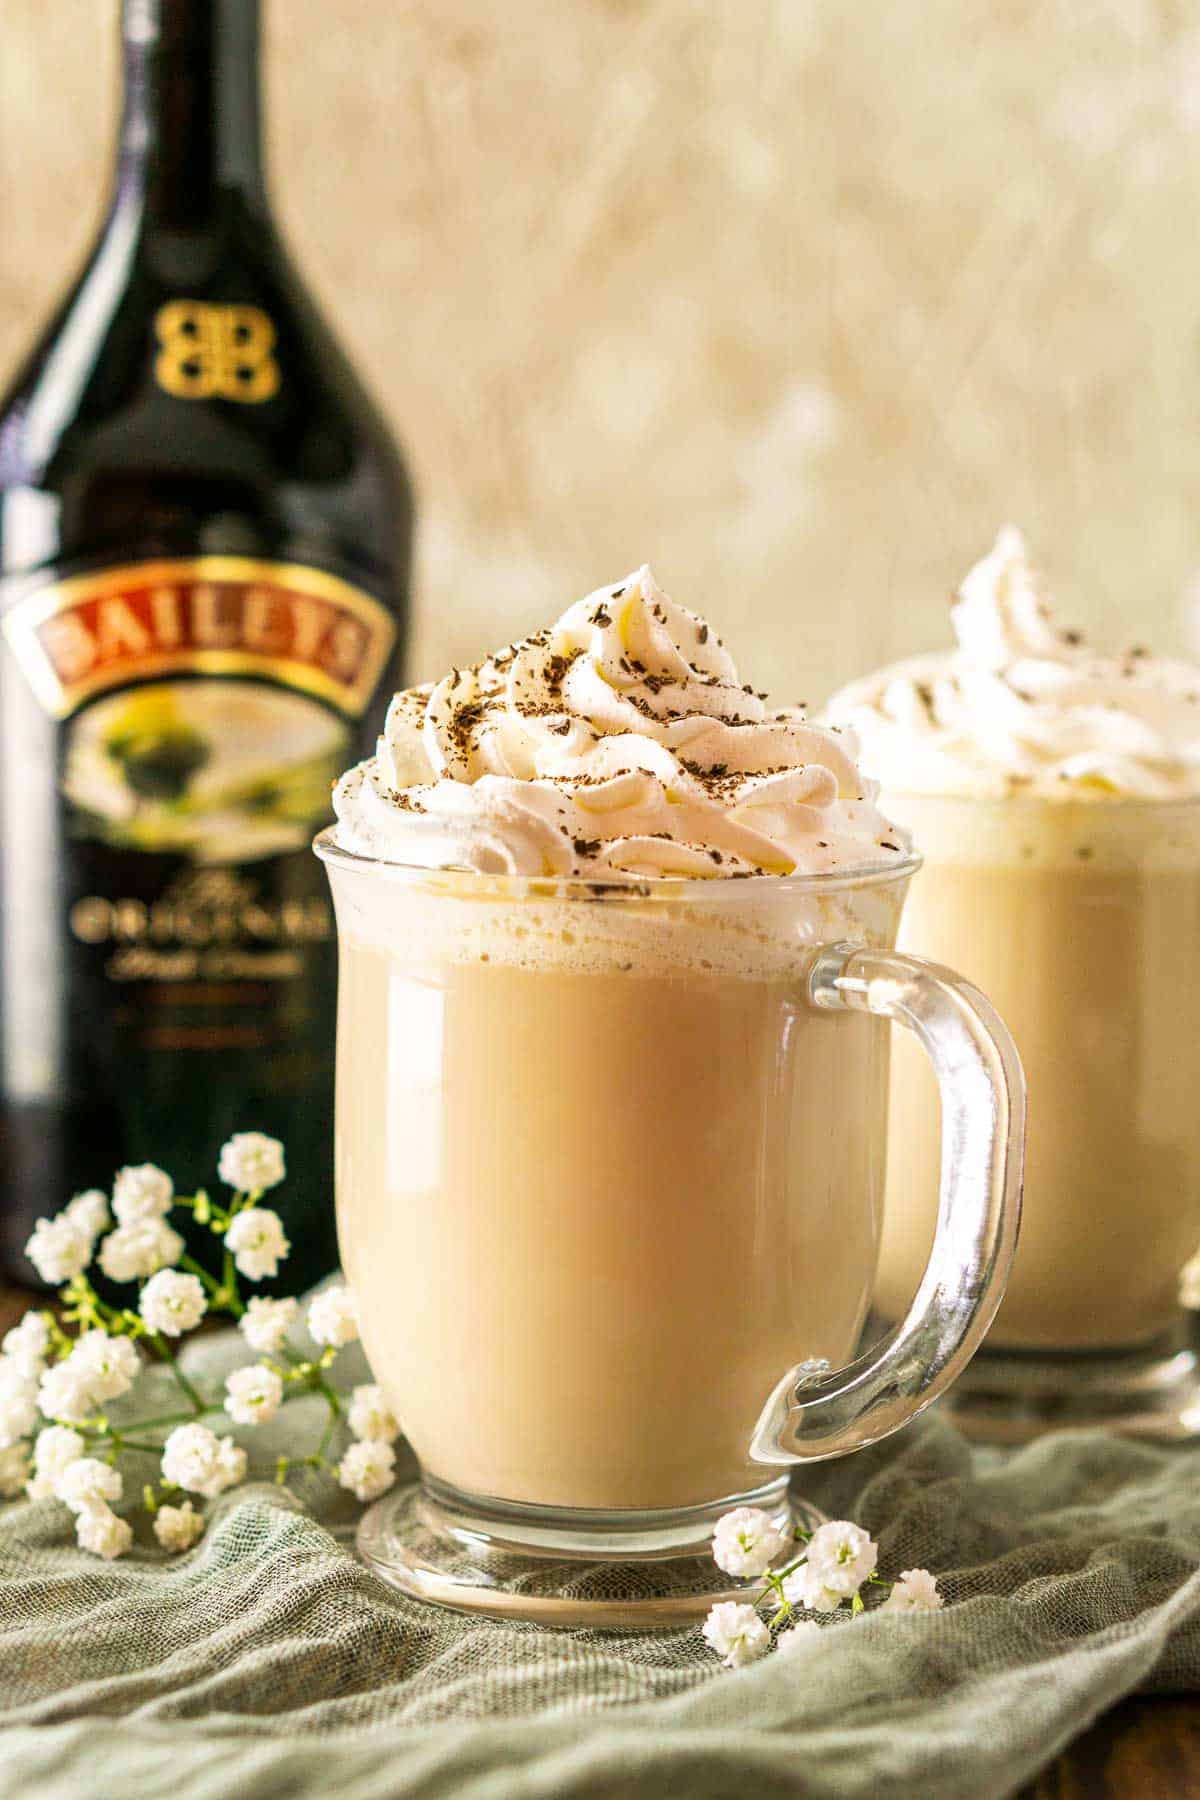 A Baileys latte on a green clothe with a bottle of Irish cream behind it.